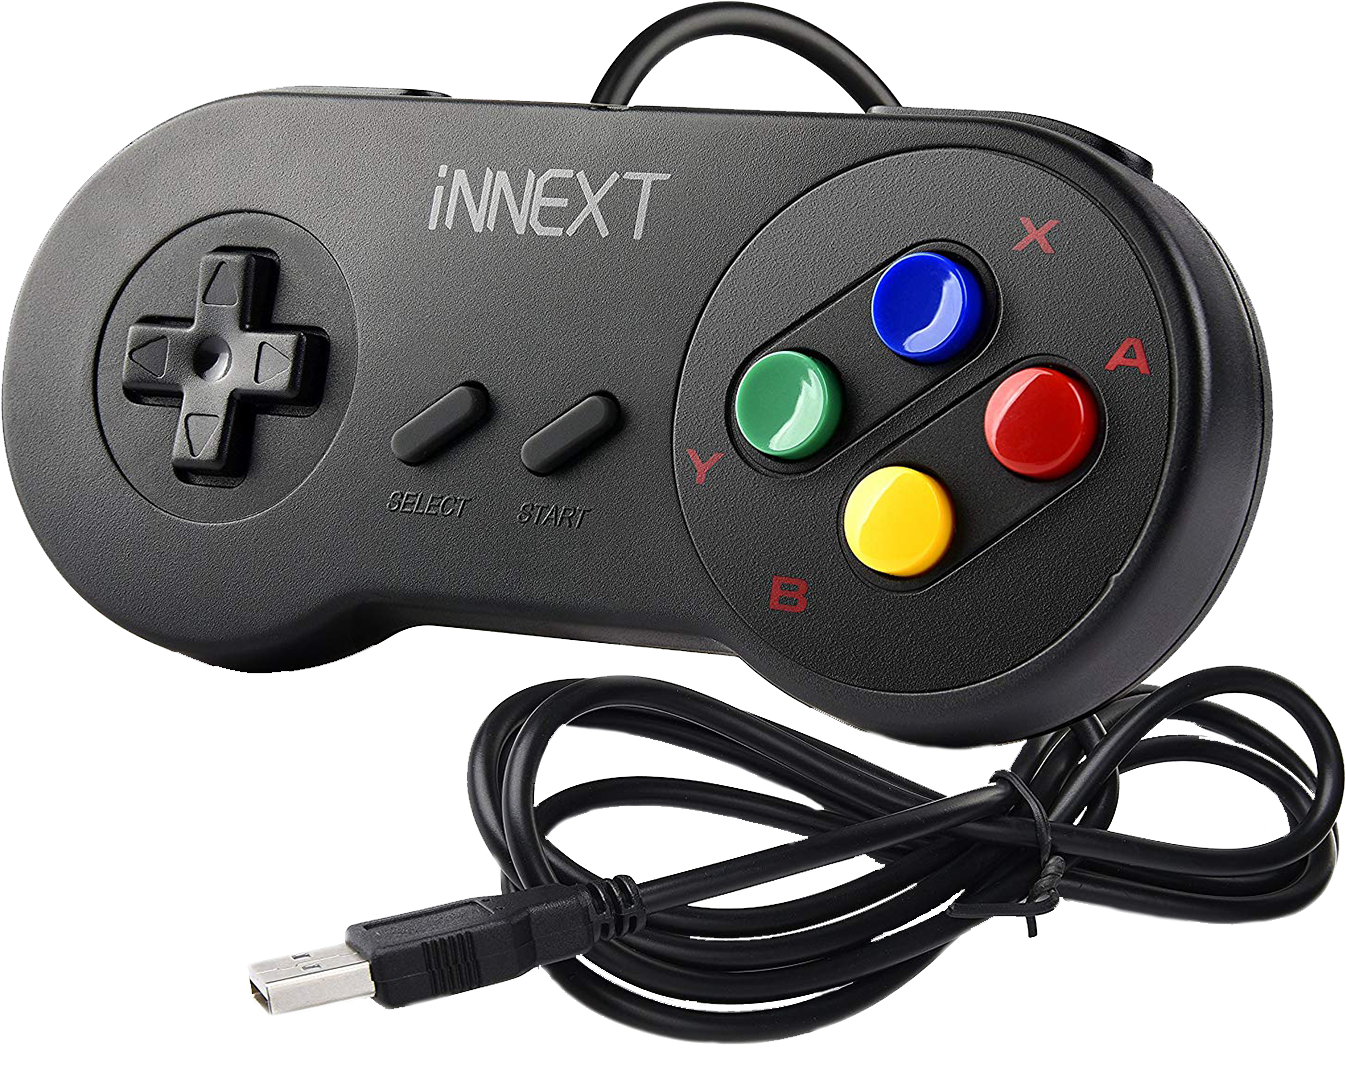 A Black Video Game Controller With Colorful Buttons And A Cord